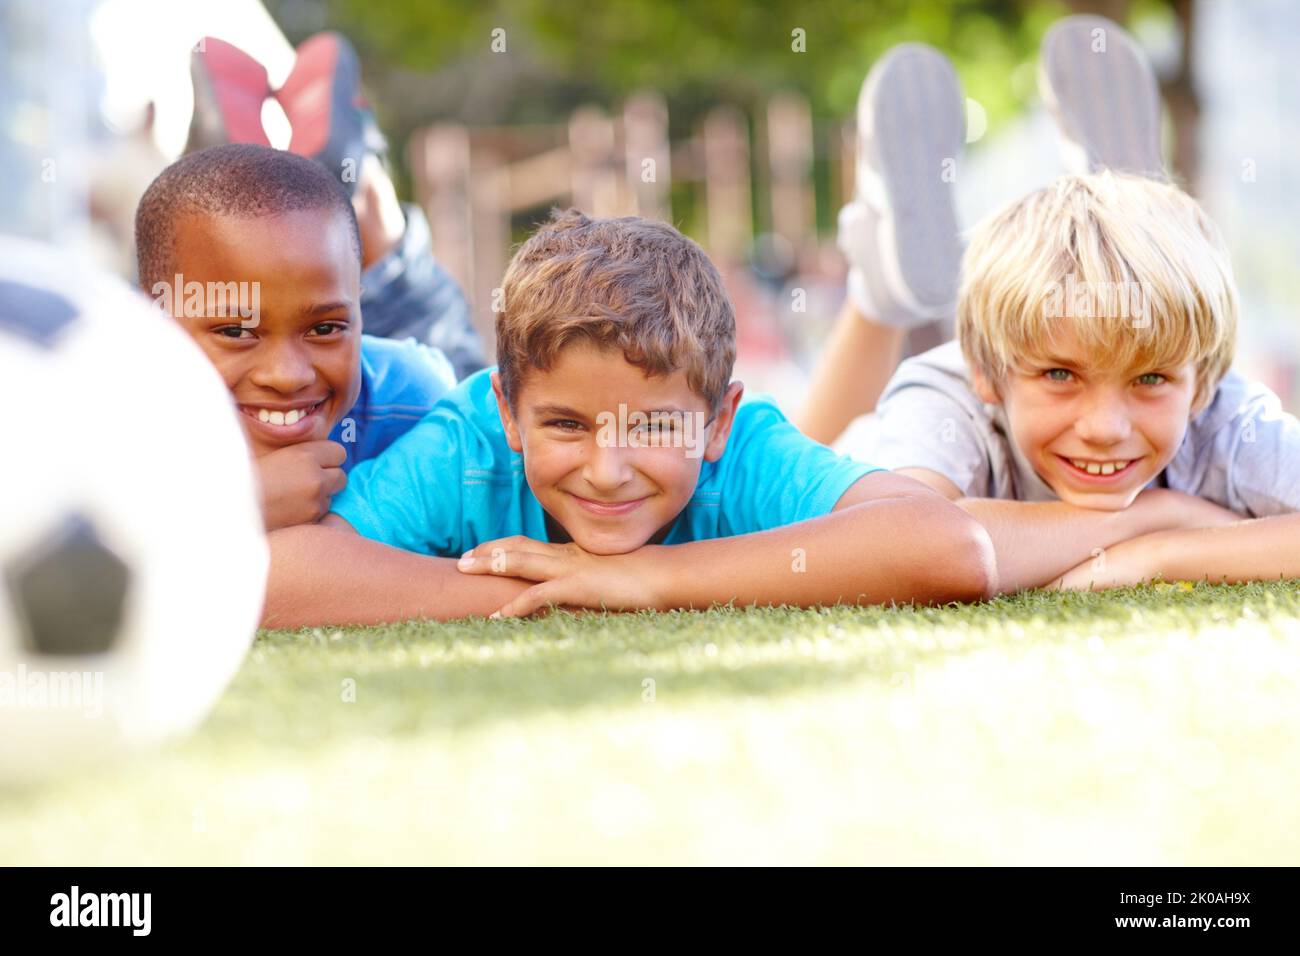 Having a ball at break-time. Three sweet boys lying on grass with a soccerball in the foreground - copyspace. Stock Photo